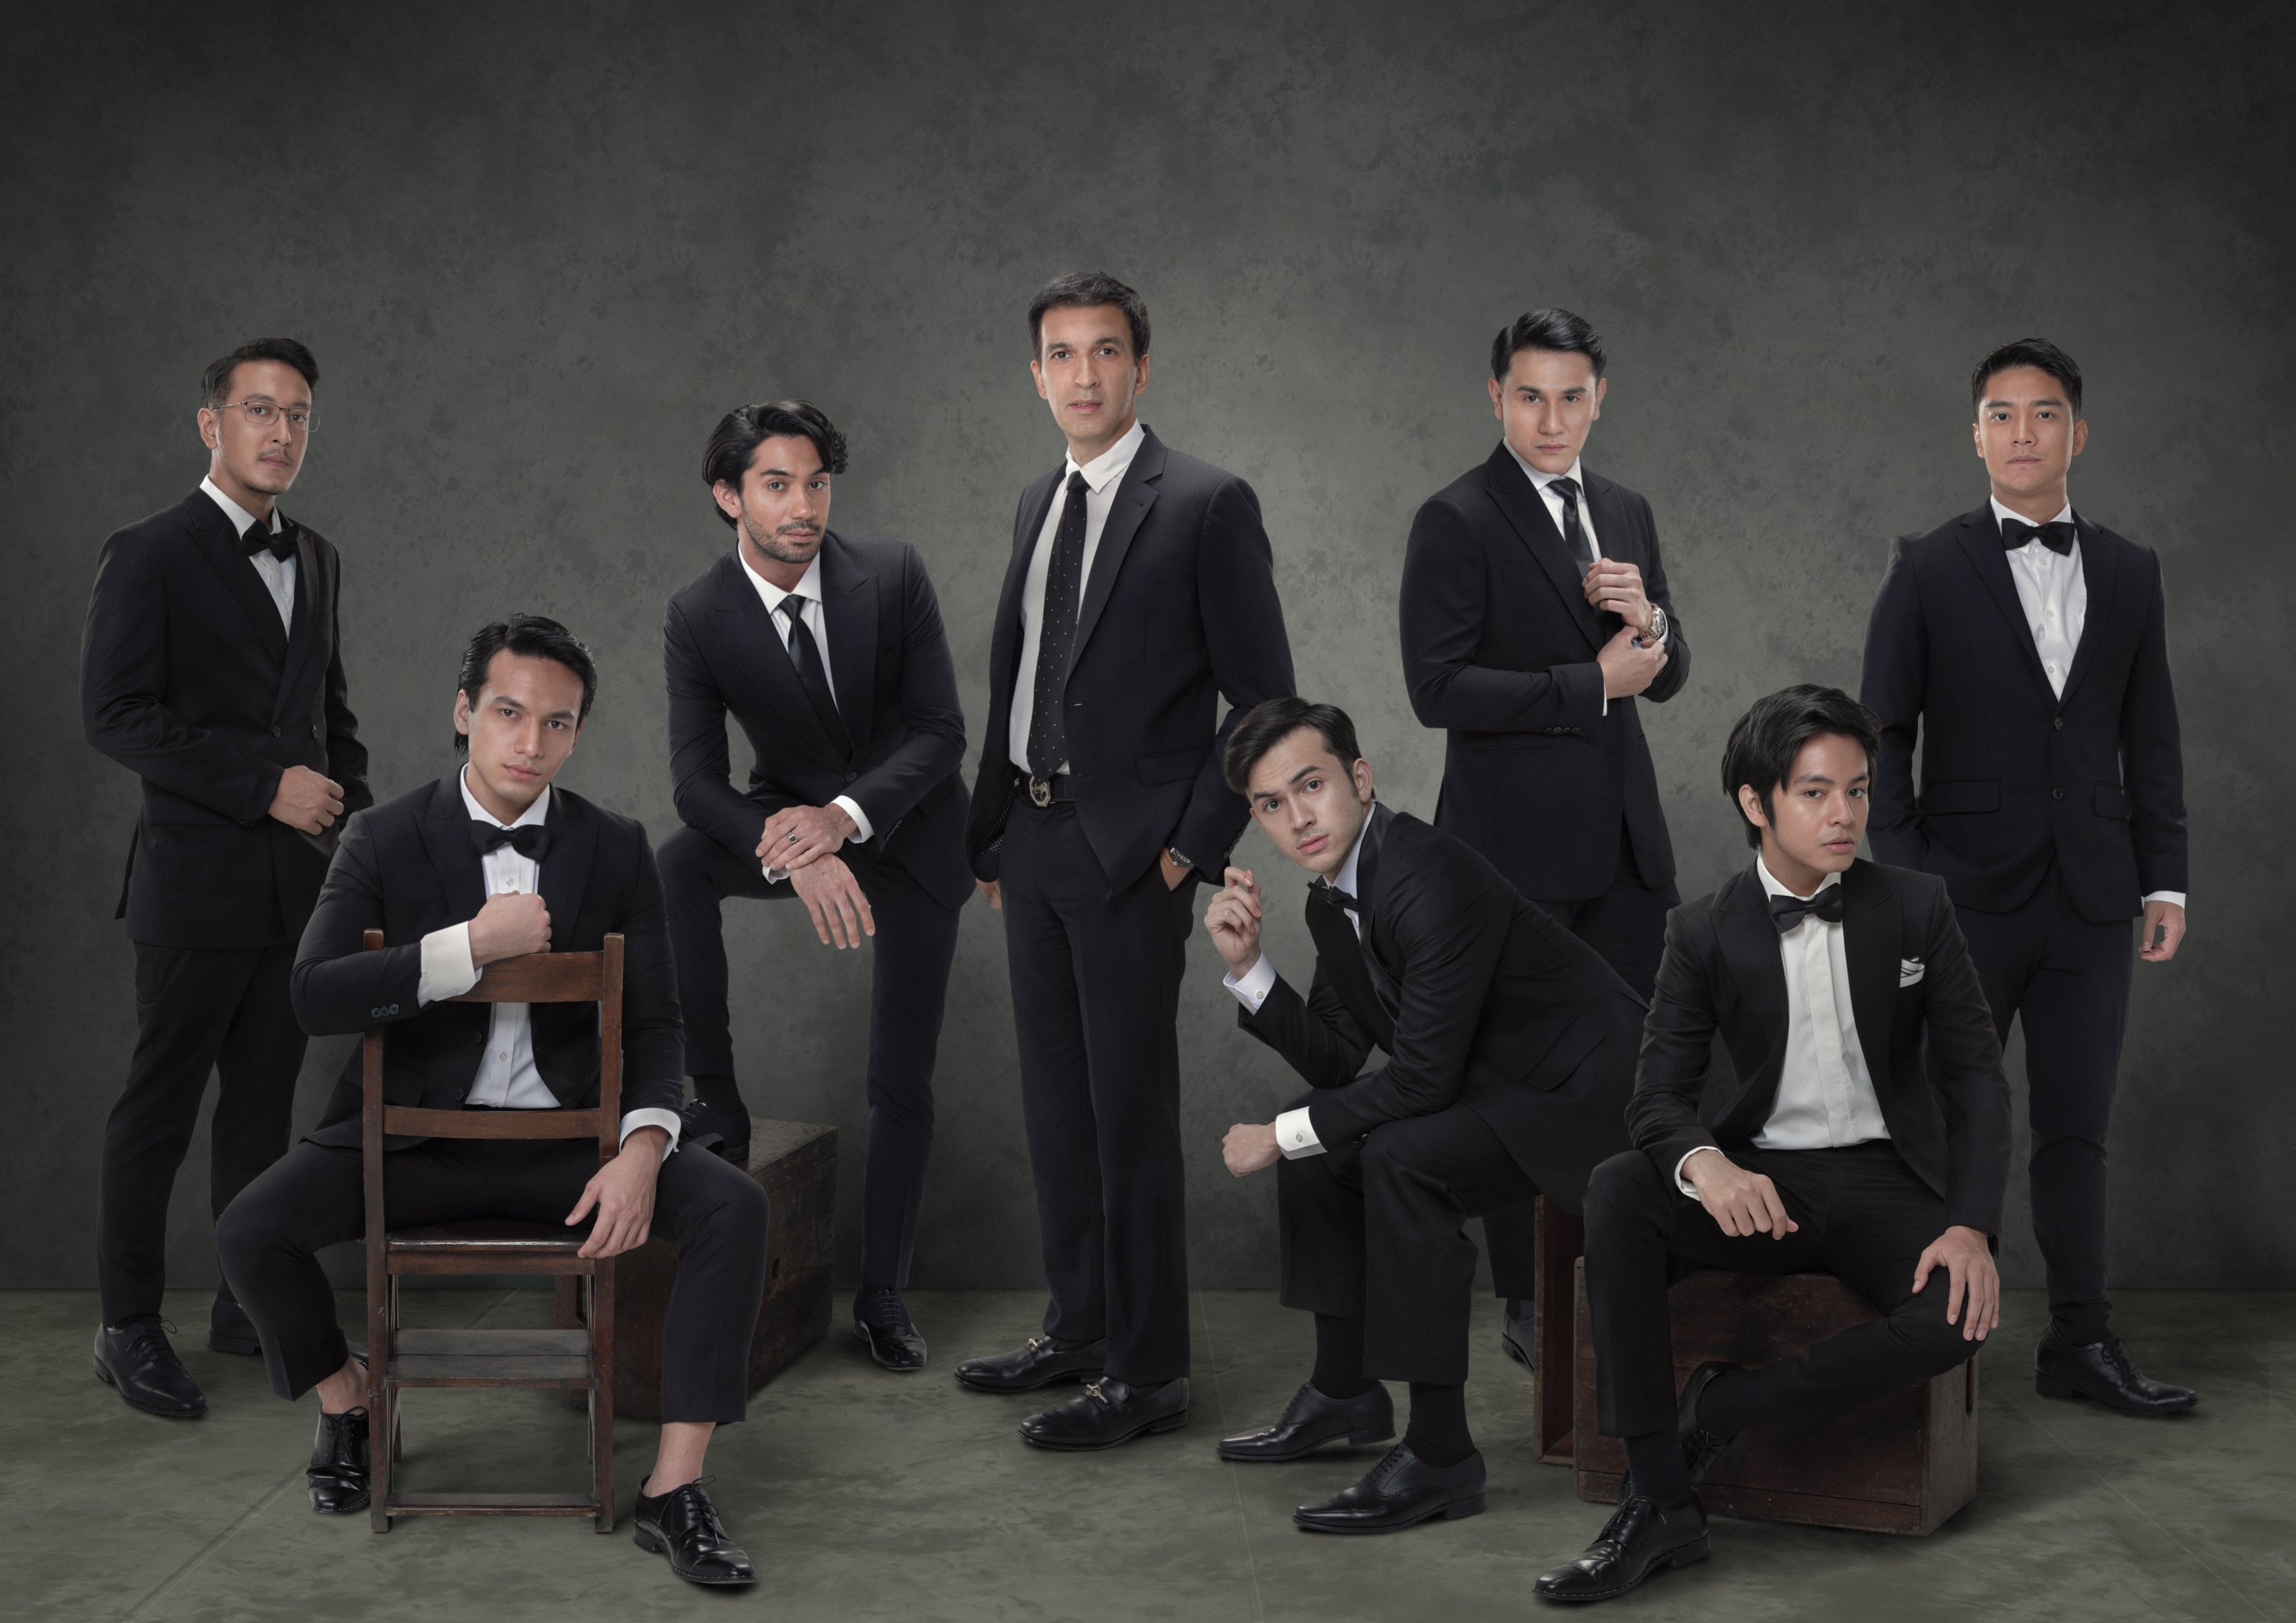 Captured in one handsome frame, the leading men of the Indonesian film industry